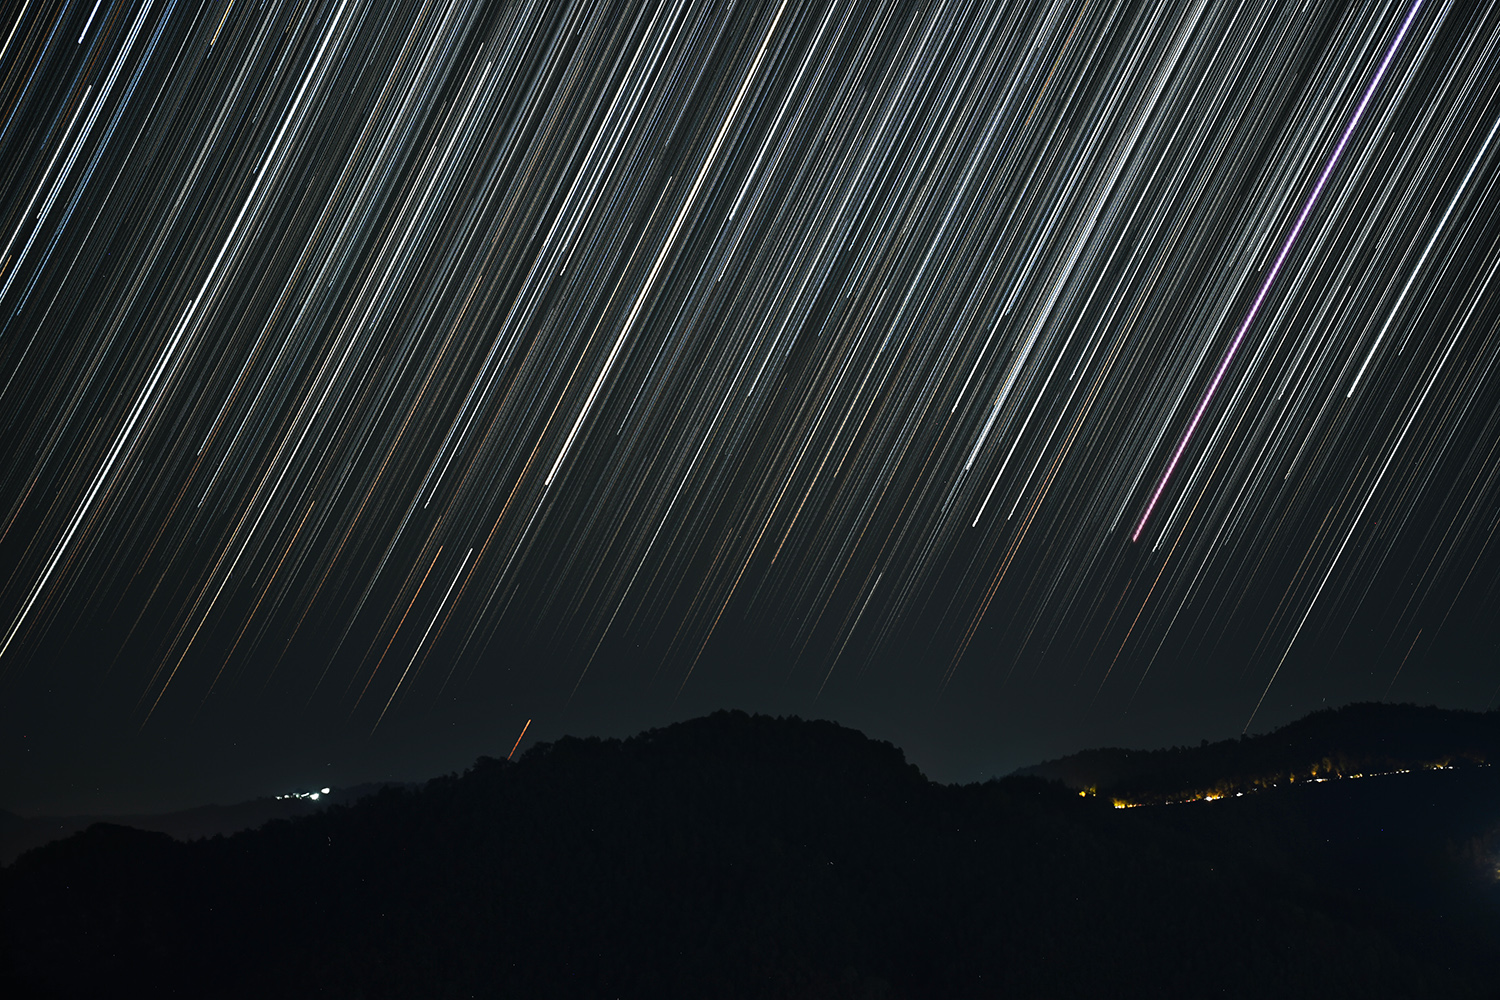 Star trail by Lens Academy Basic Photography student Ishita A